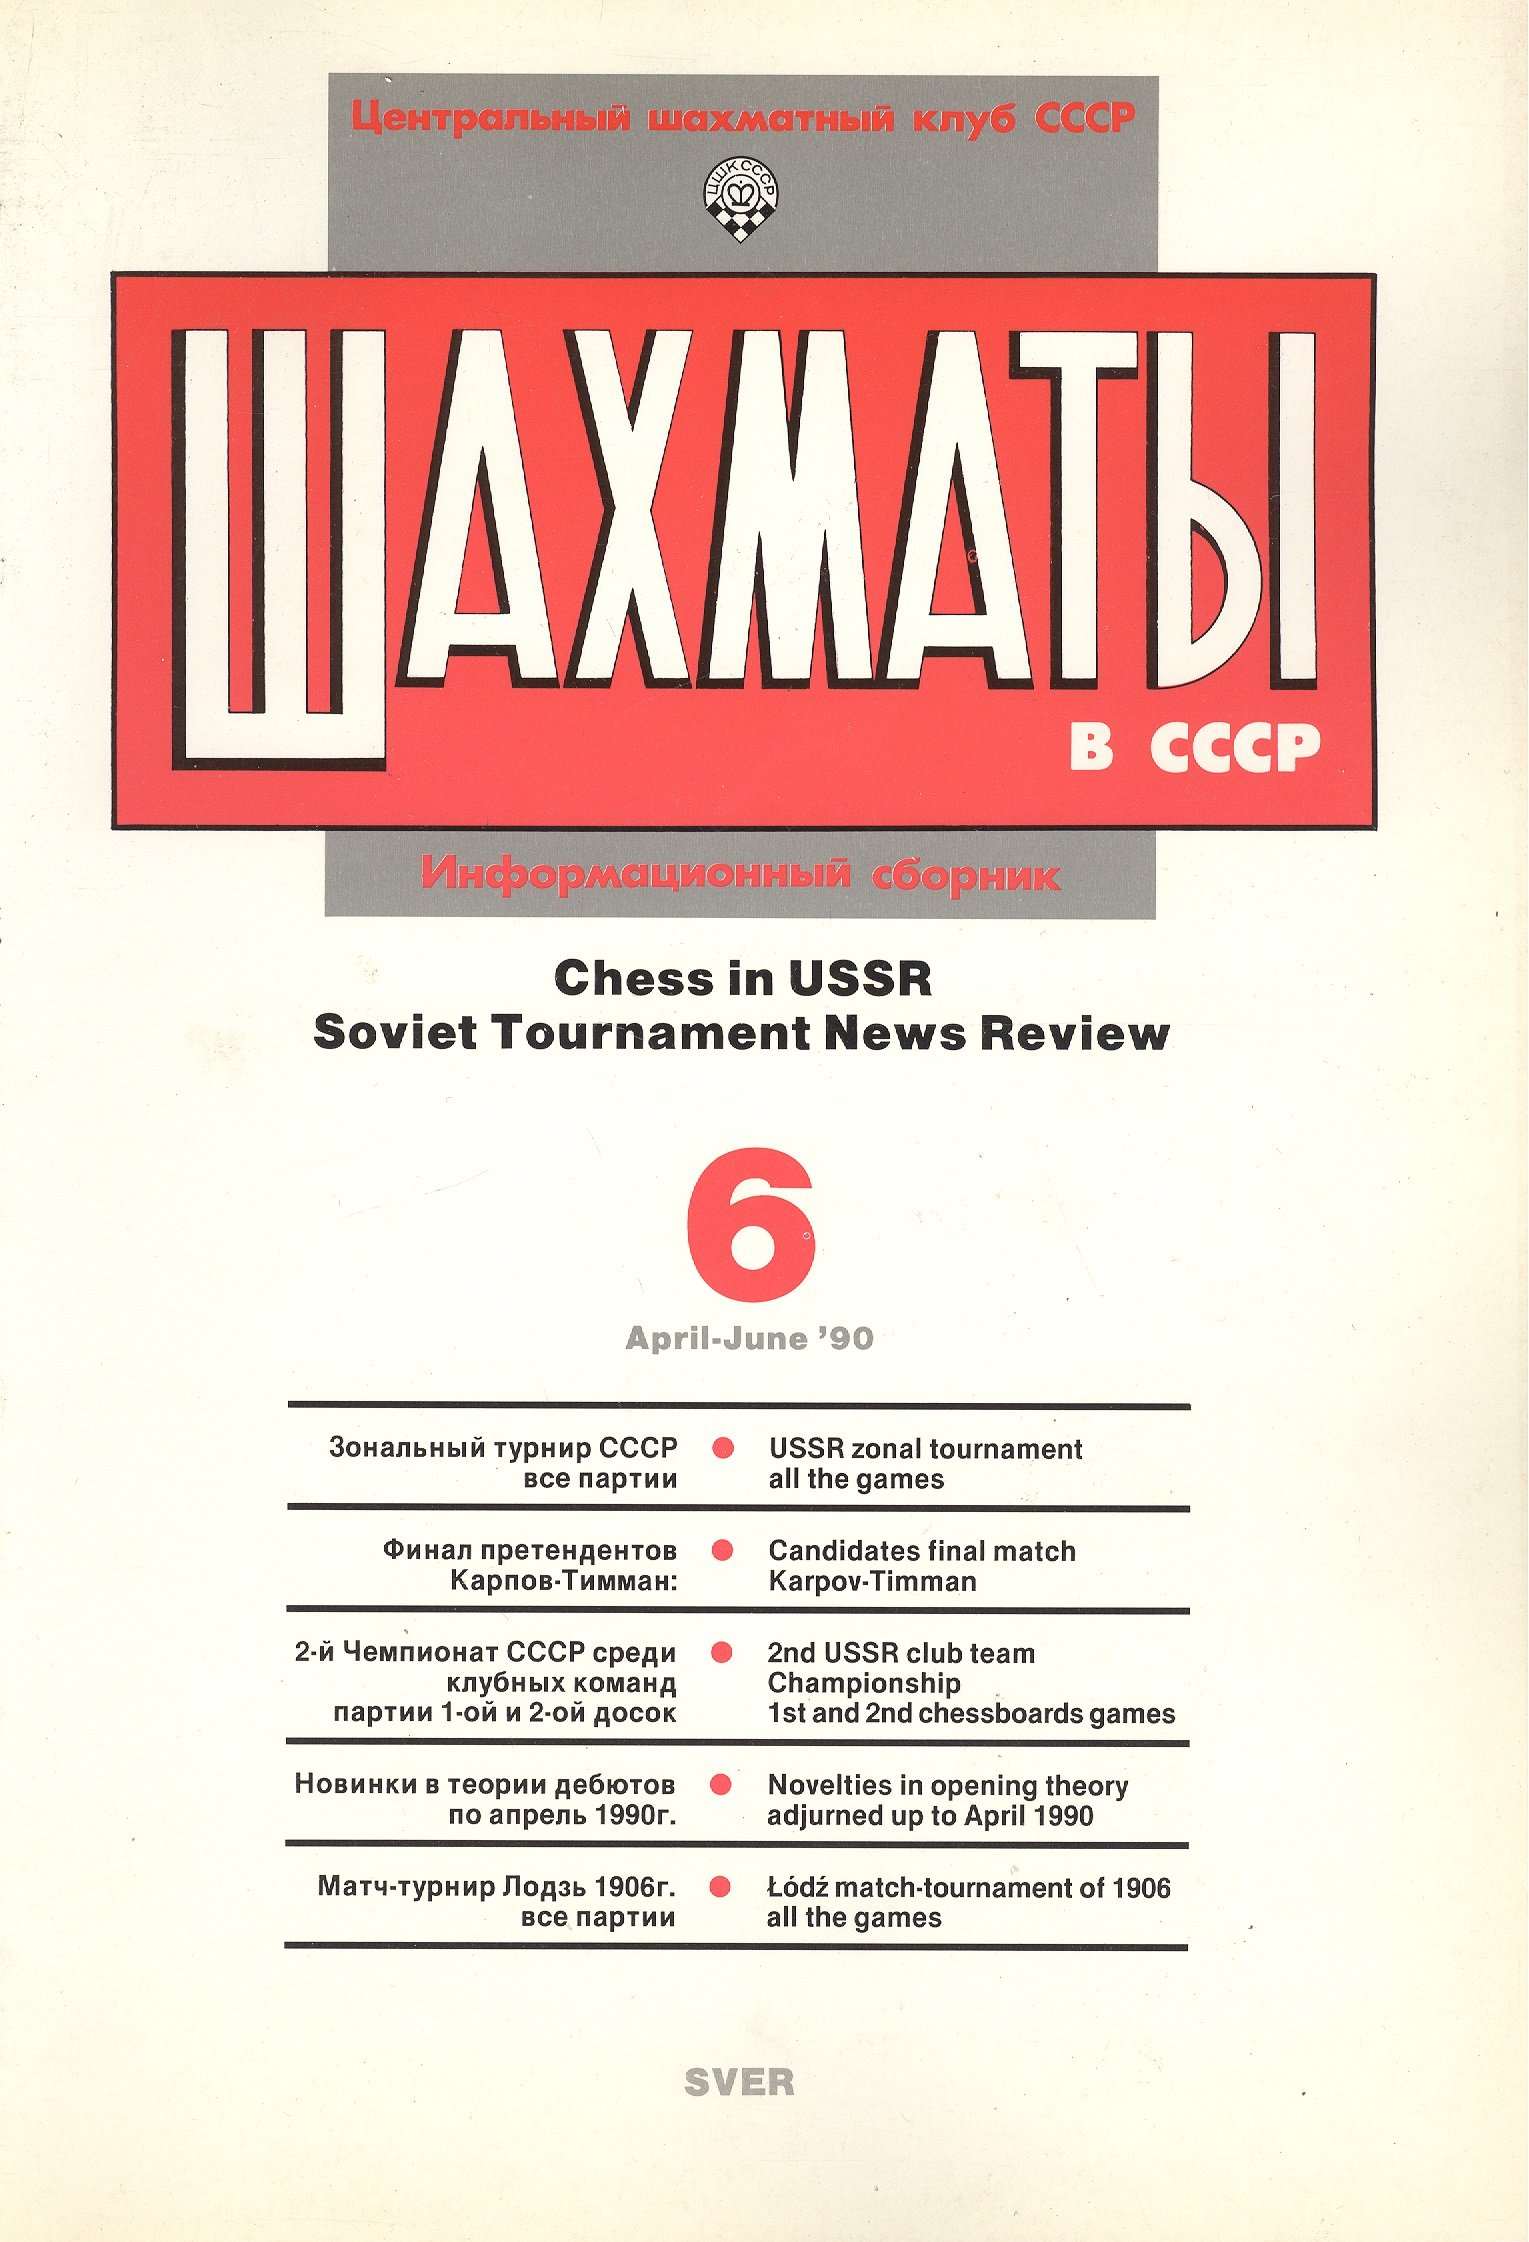   .   90/6. Chess in USSR. Soviet Tournament News Review 6 April - June `90